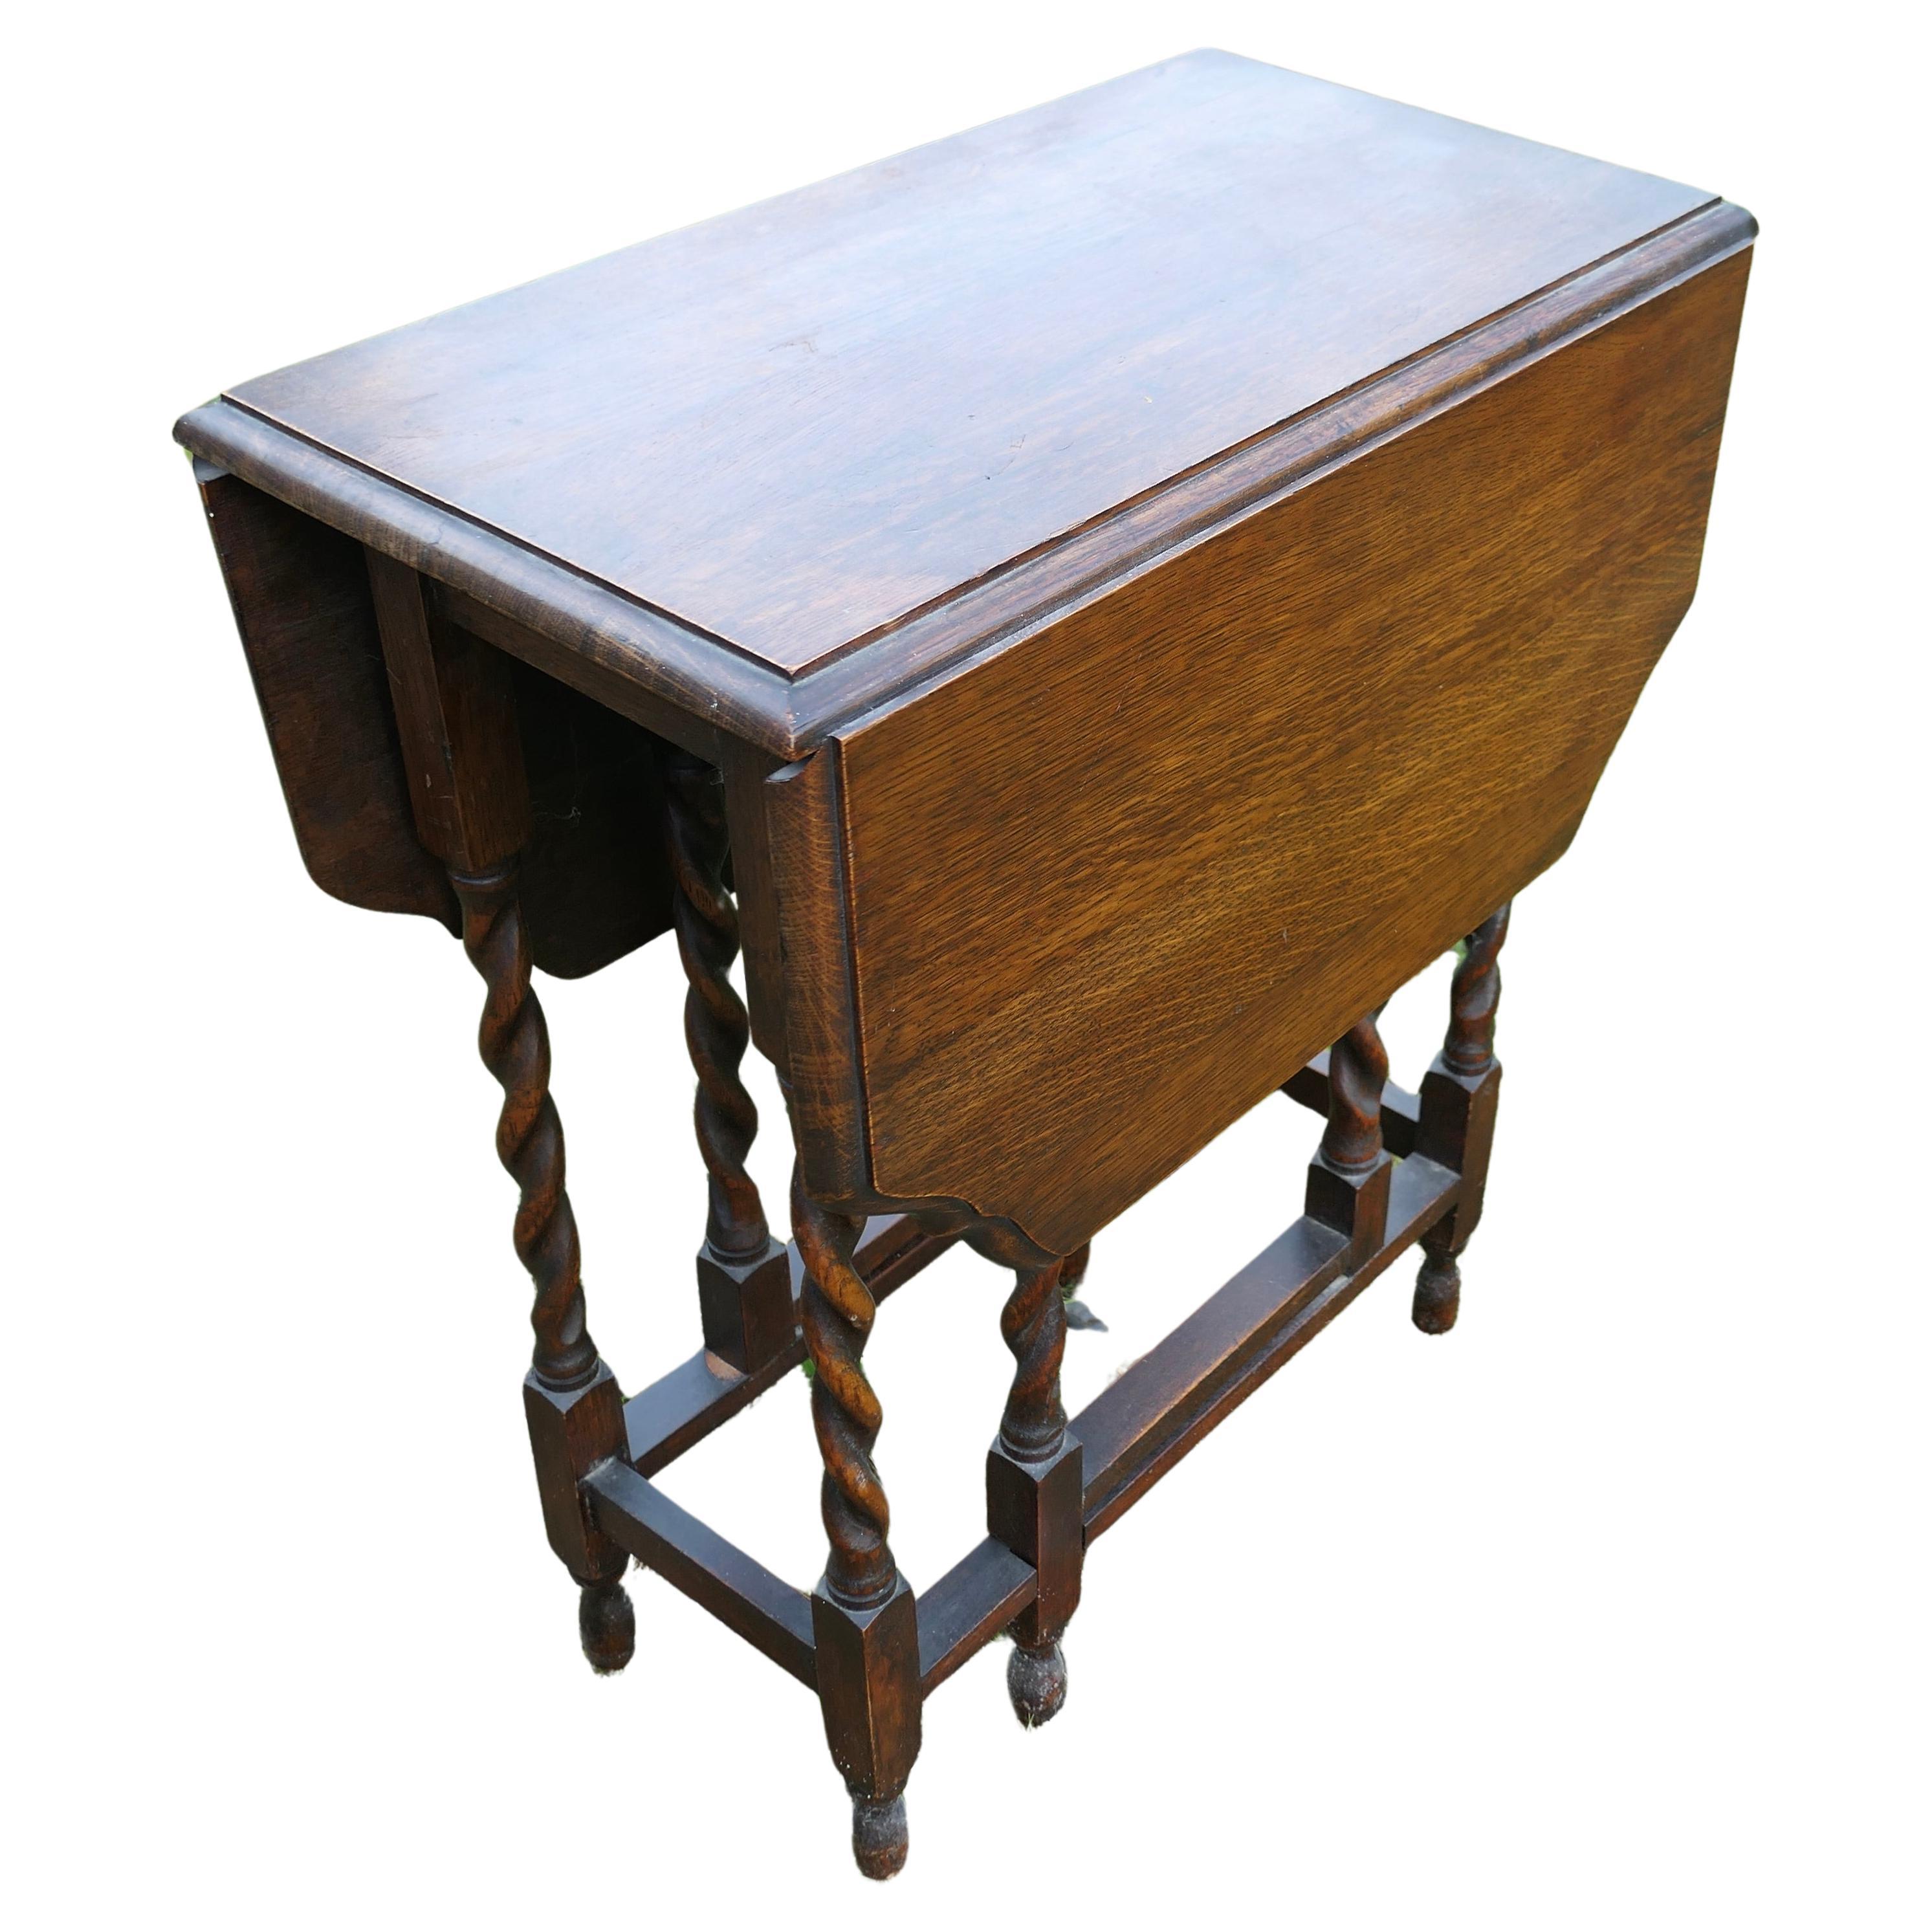 A Good Solid Oak Victorian Gate Leg Table   The table is made from solid Oak   For Sale